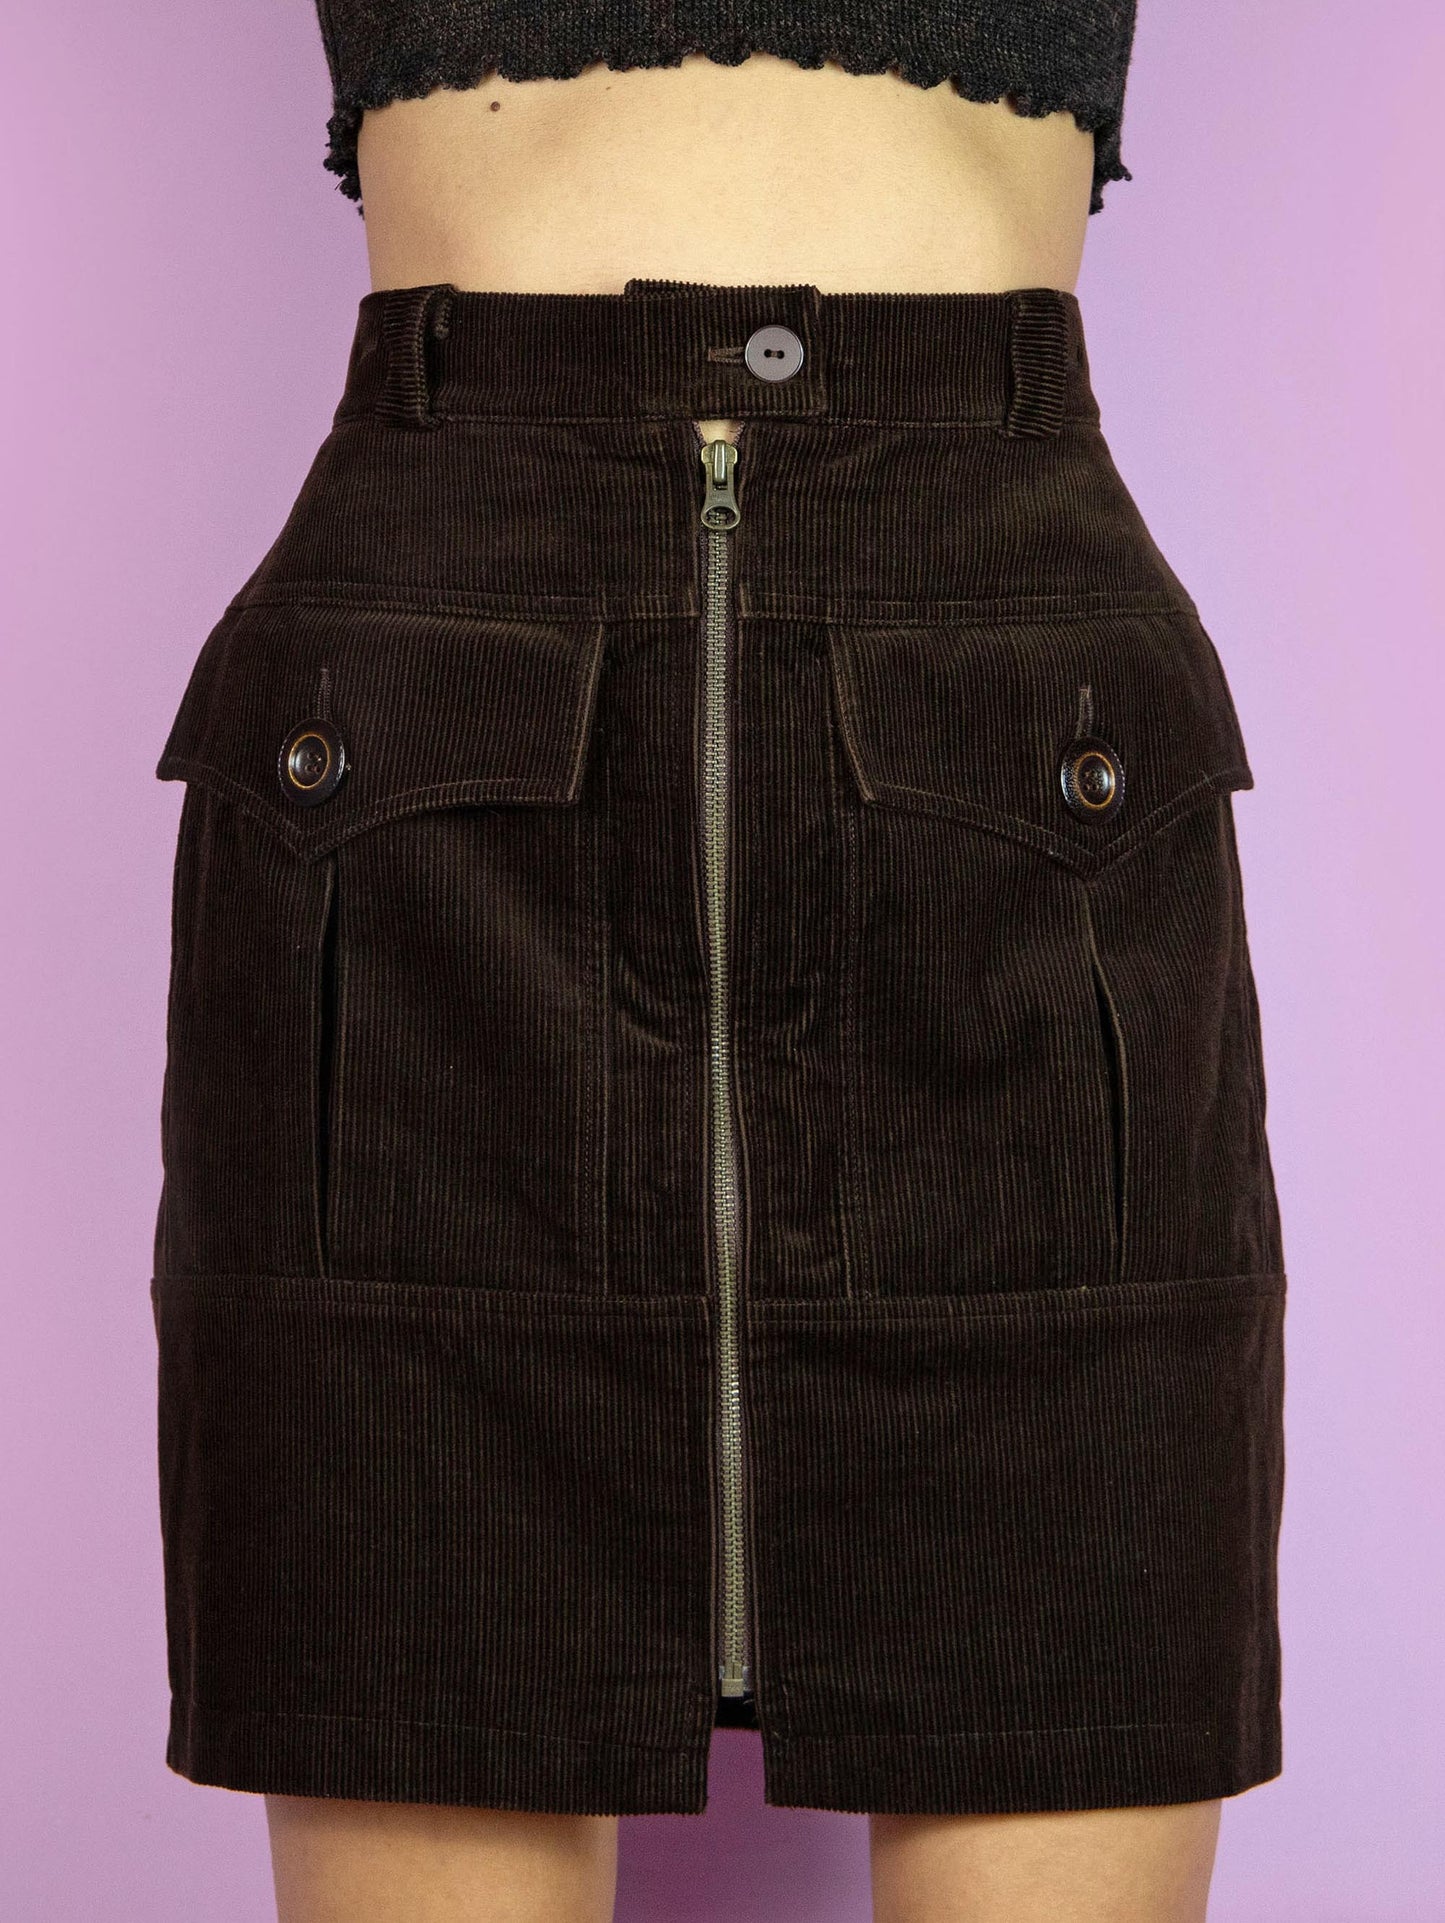 The Vintage 90s Brown Cargo Mini Skirt is a dark brown pencil corduroy skirt with pockets and a front zipper closure. Retro grunge 1990s utility mini skirt.